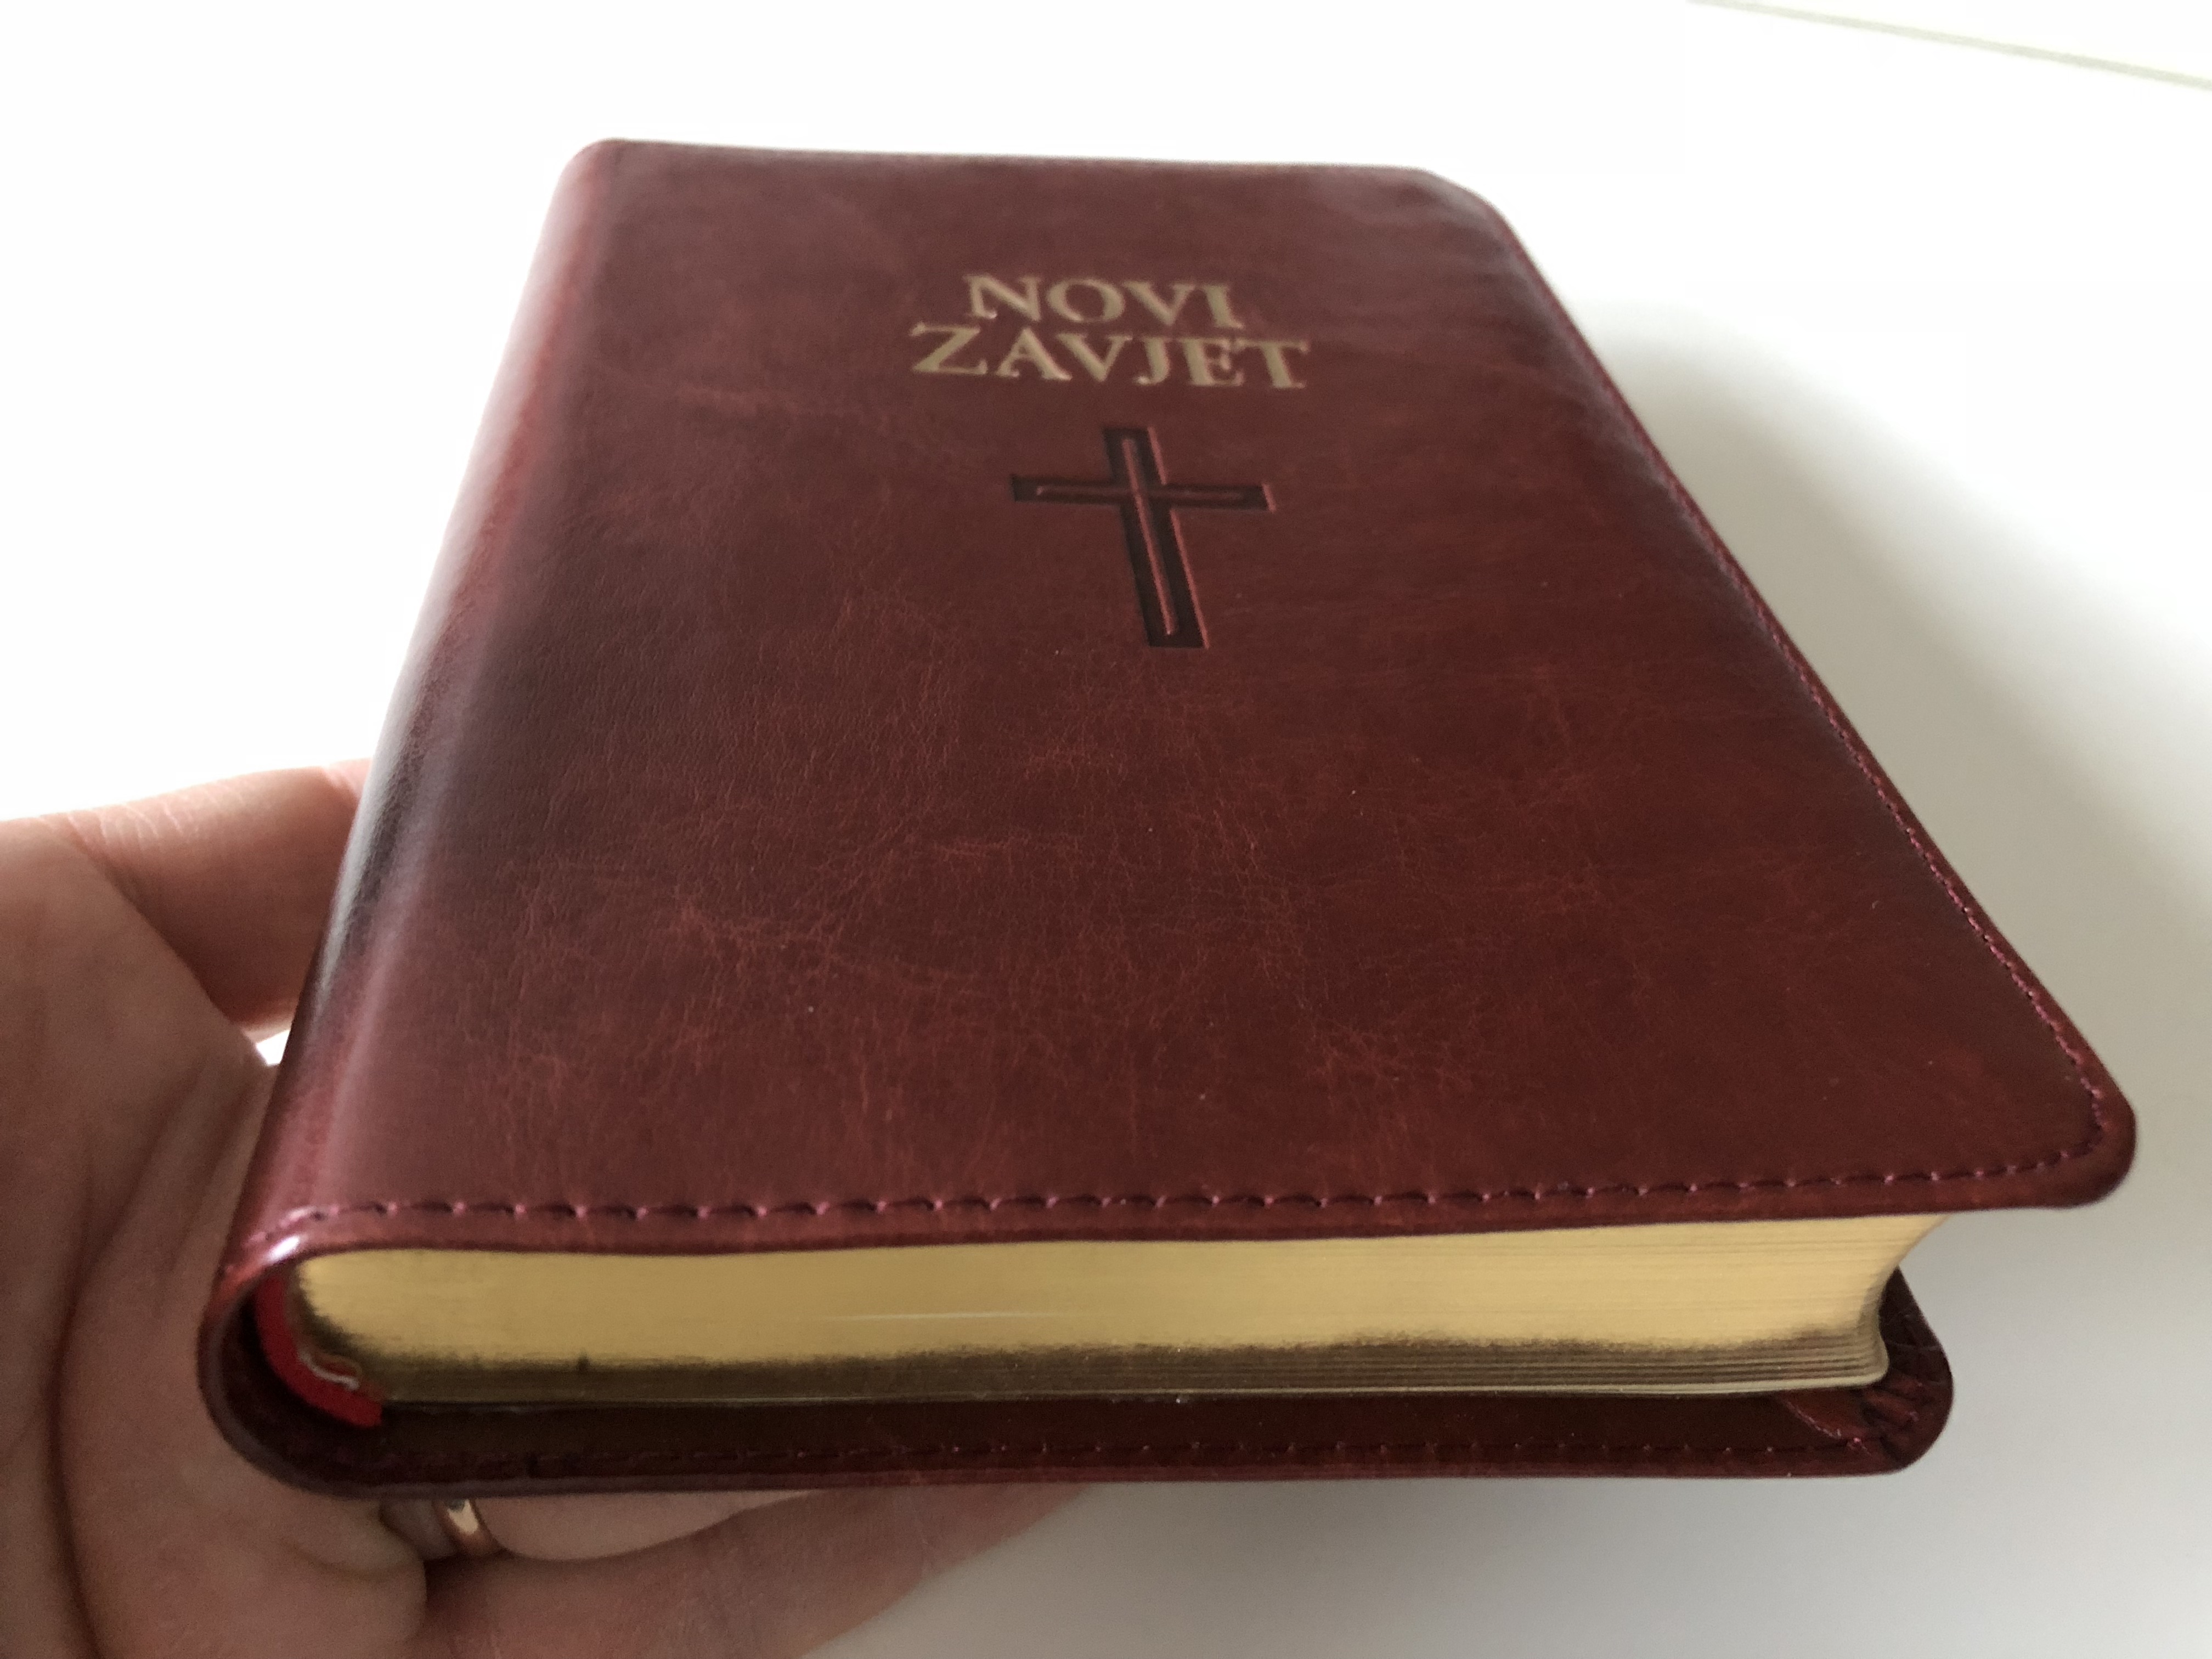 novi-zavjet-the-new-testament-in-croatian-language-leather-bound-brown-golden-edges-hbd-2017-translated-from-greek-texts-by-lj.-rup-i-2-.jpg